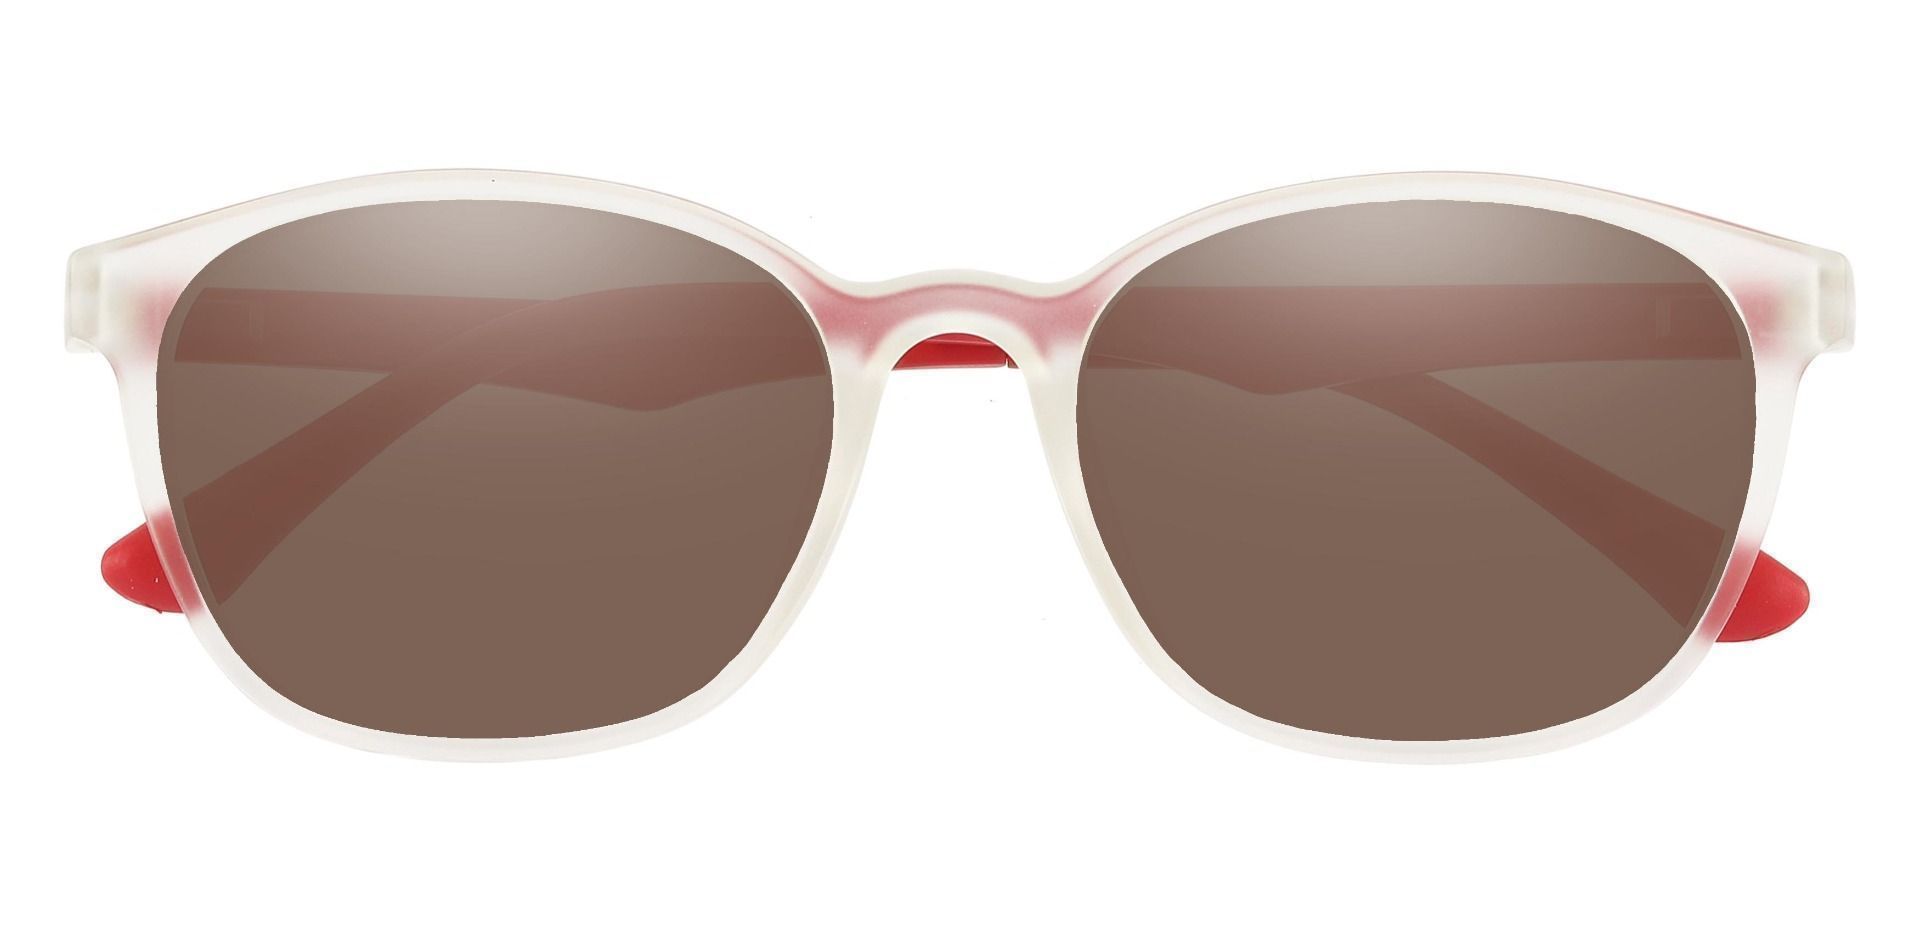 Ursula Oval Non-Rx Sunglasses - Matte Clear Frame With Brown Lenses